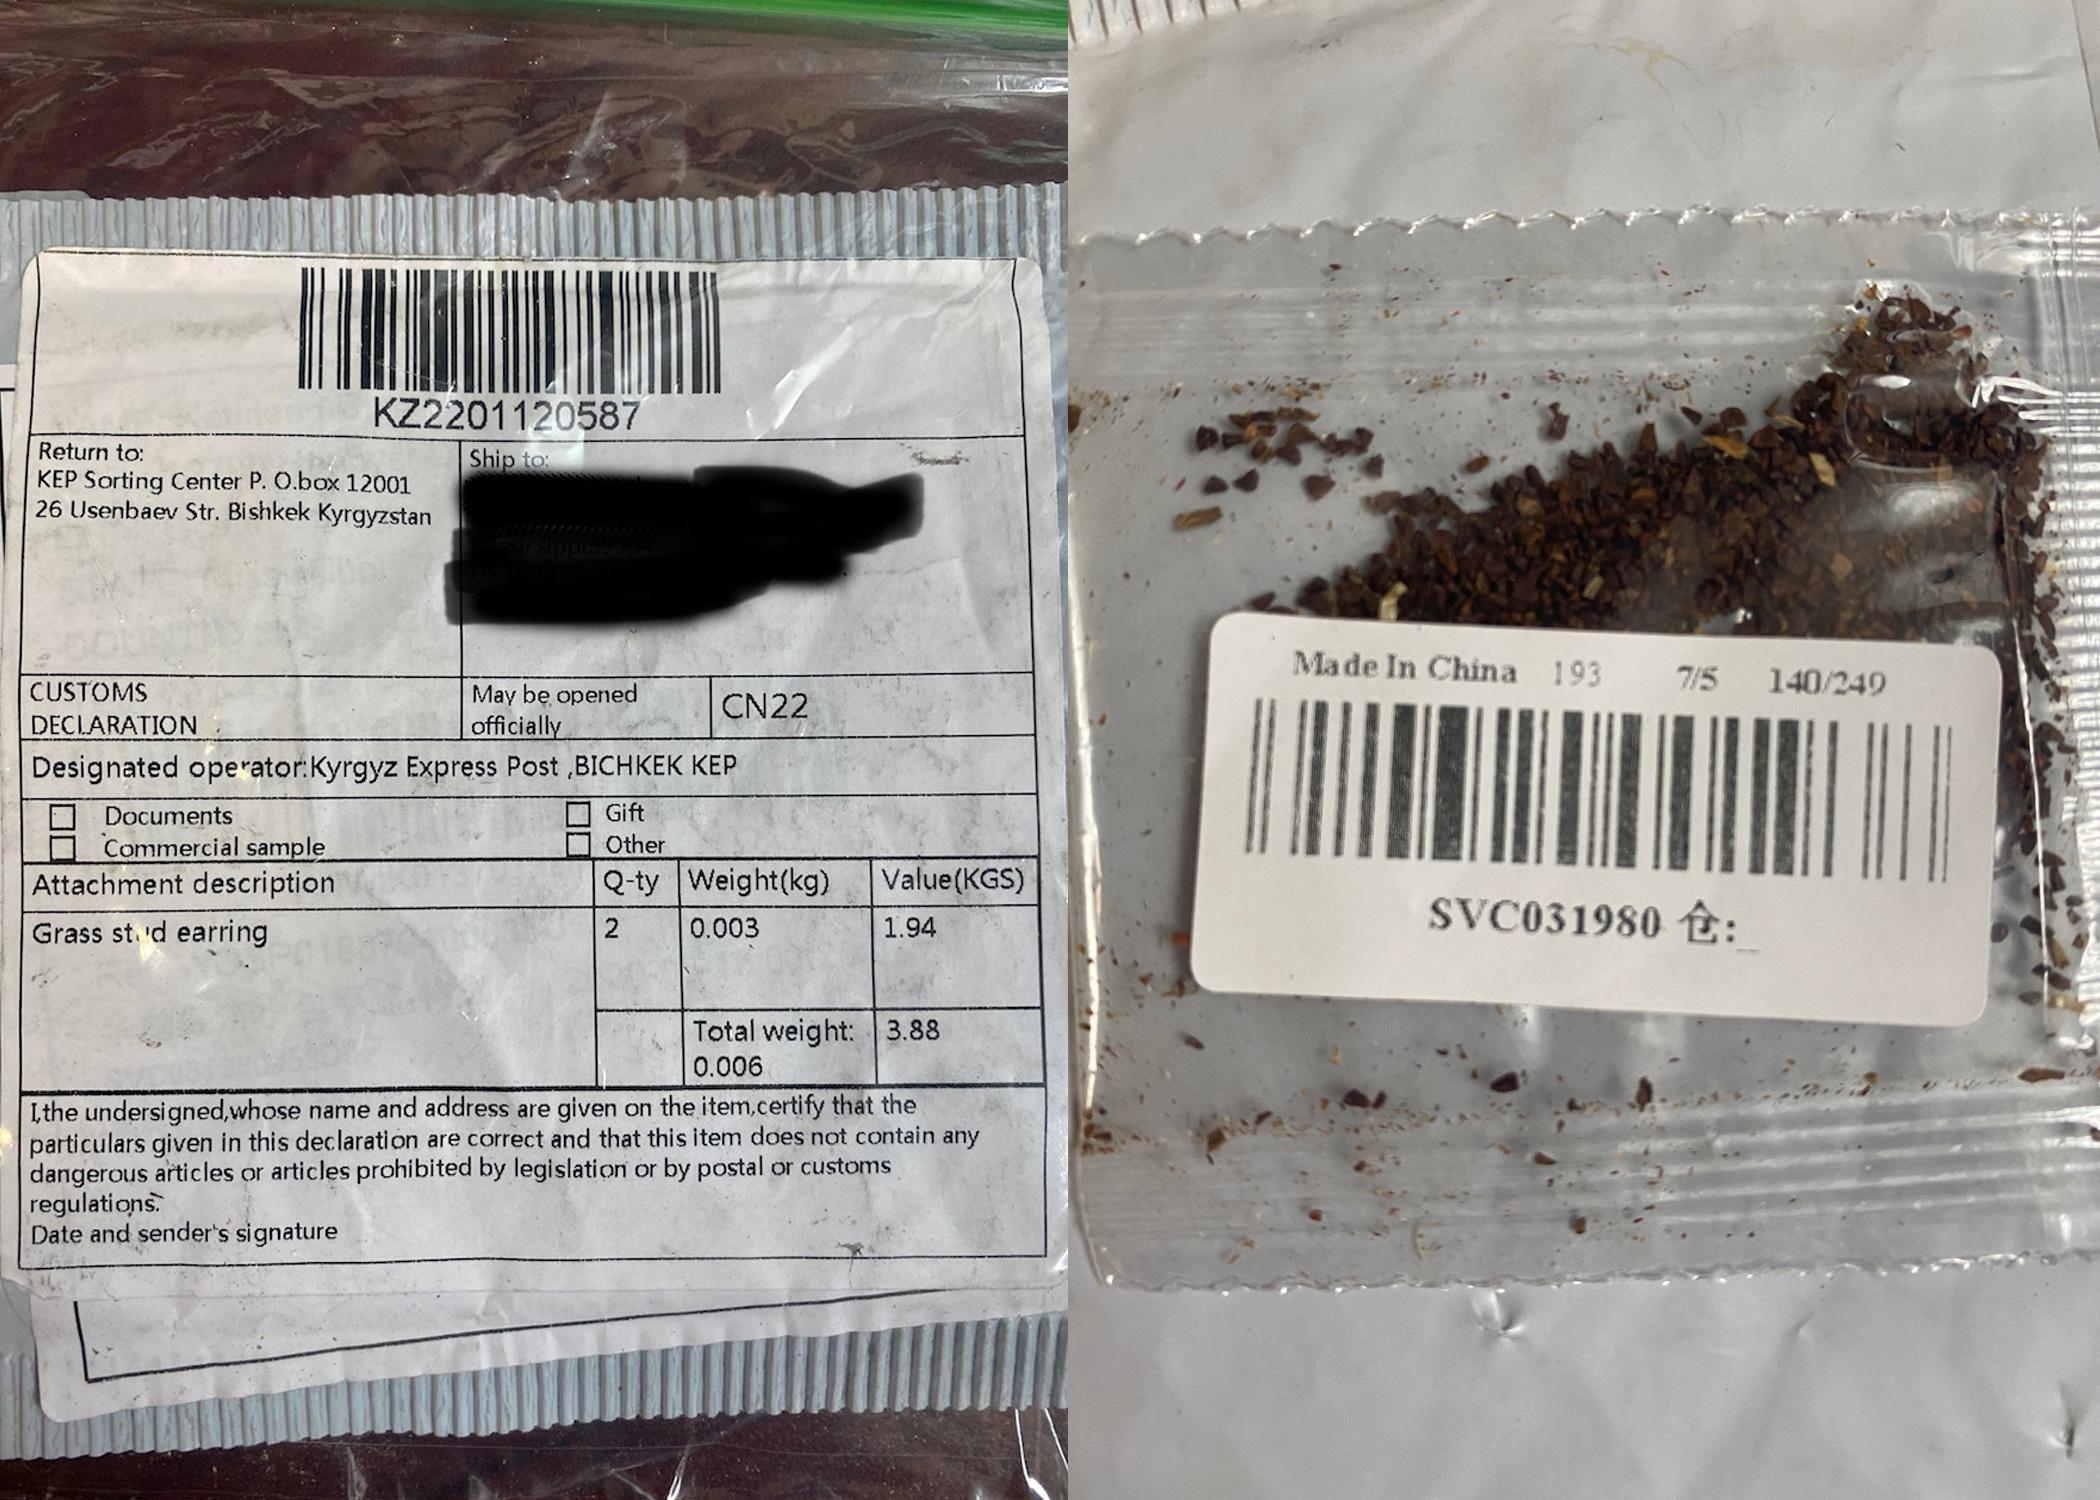 Side-by-side images showing exterior packaging materials and close-up seed packet.